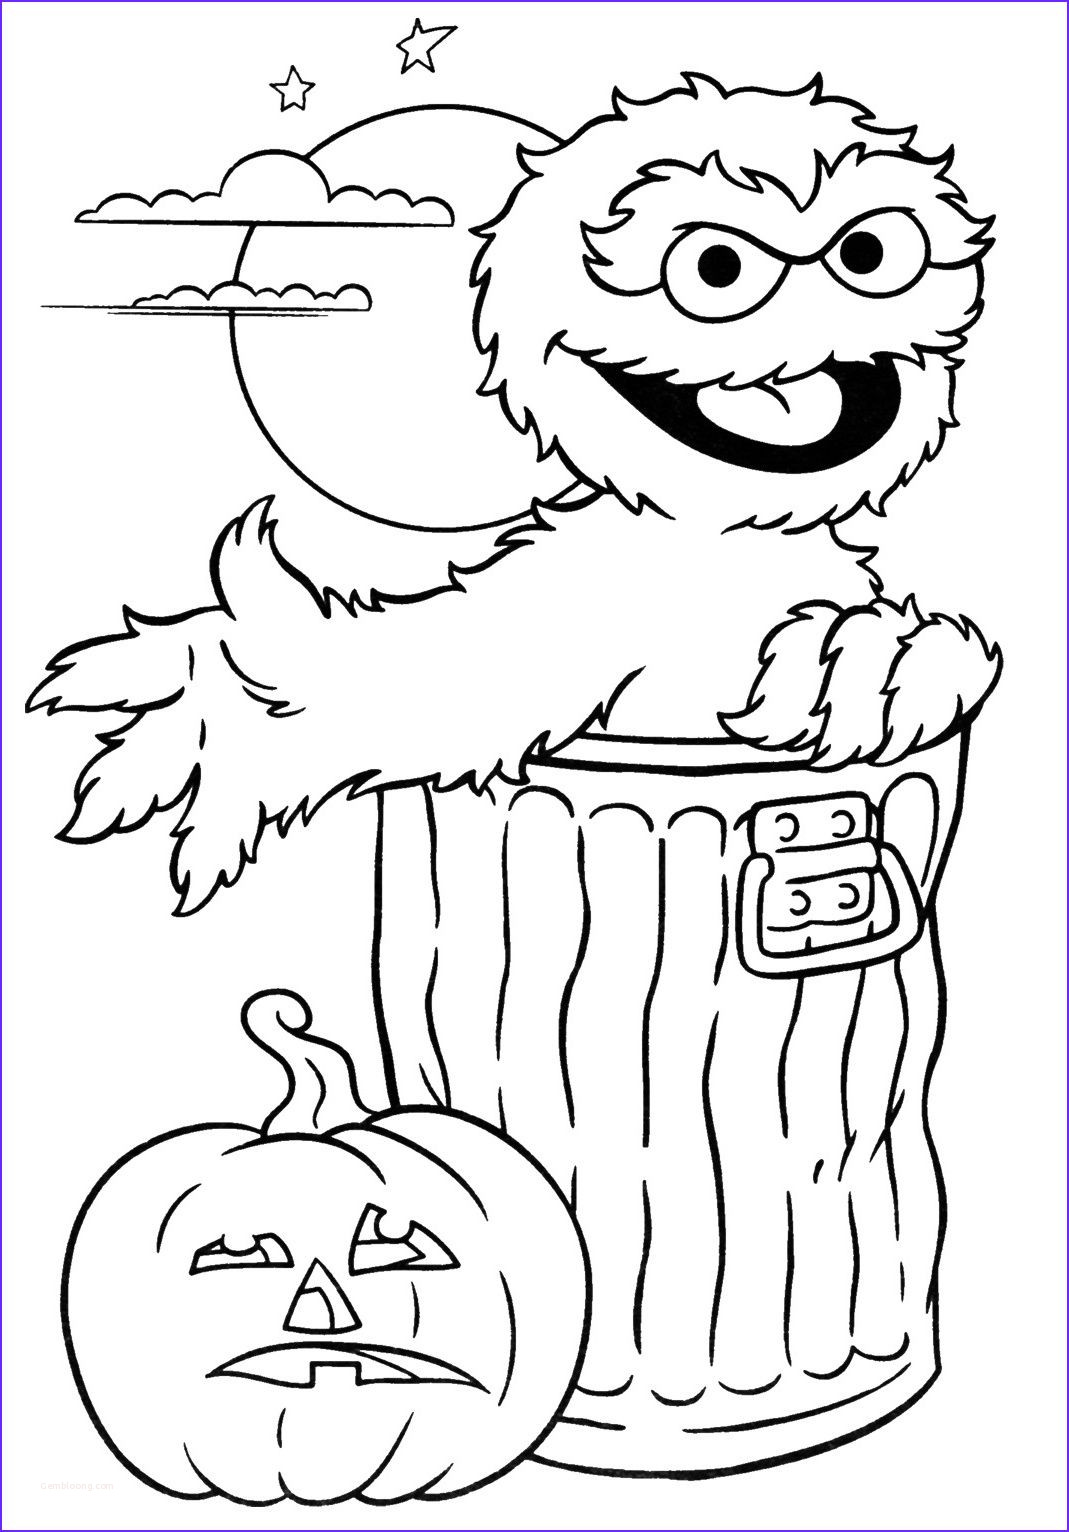 coloring pages : Printable Halloween Coloring Pages Inspirational Pin On  Food Drink Printable Halloween Coloring Pages ~ peak